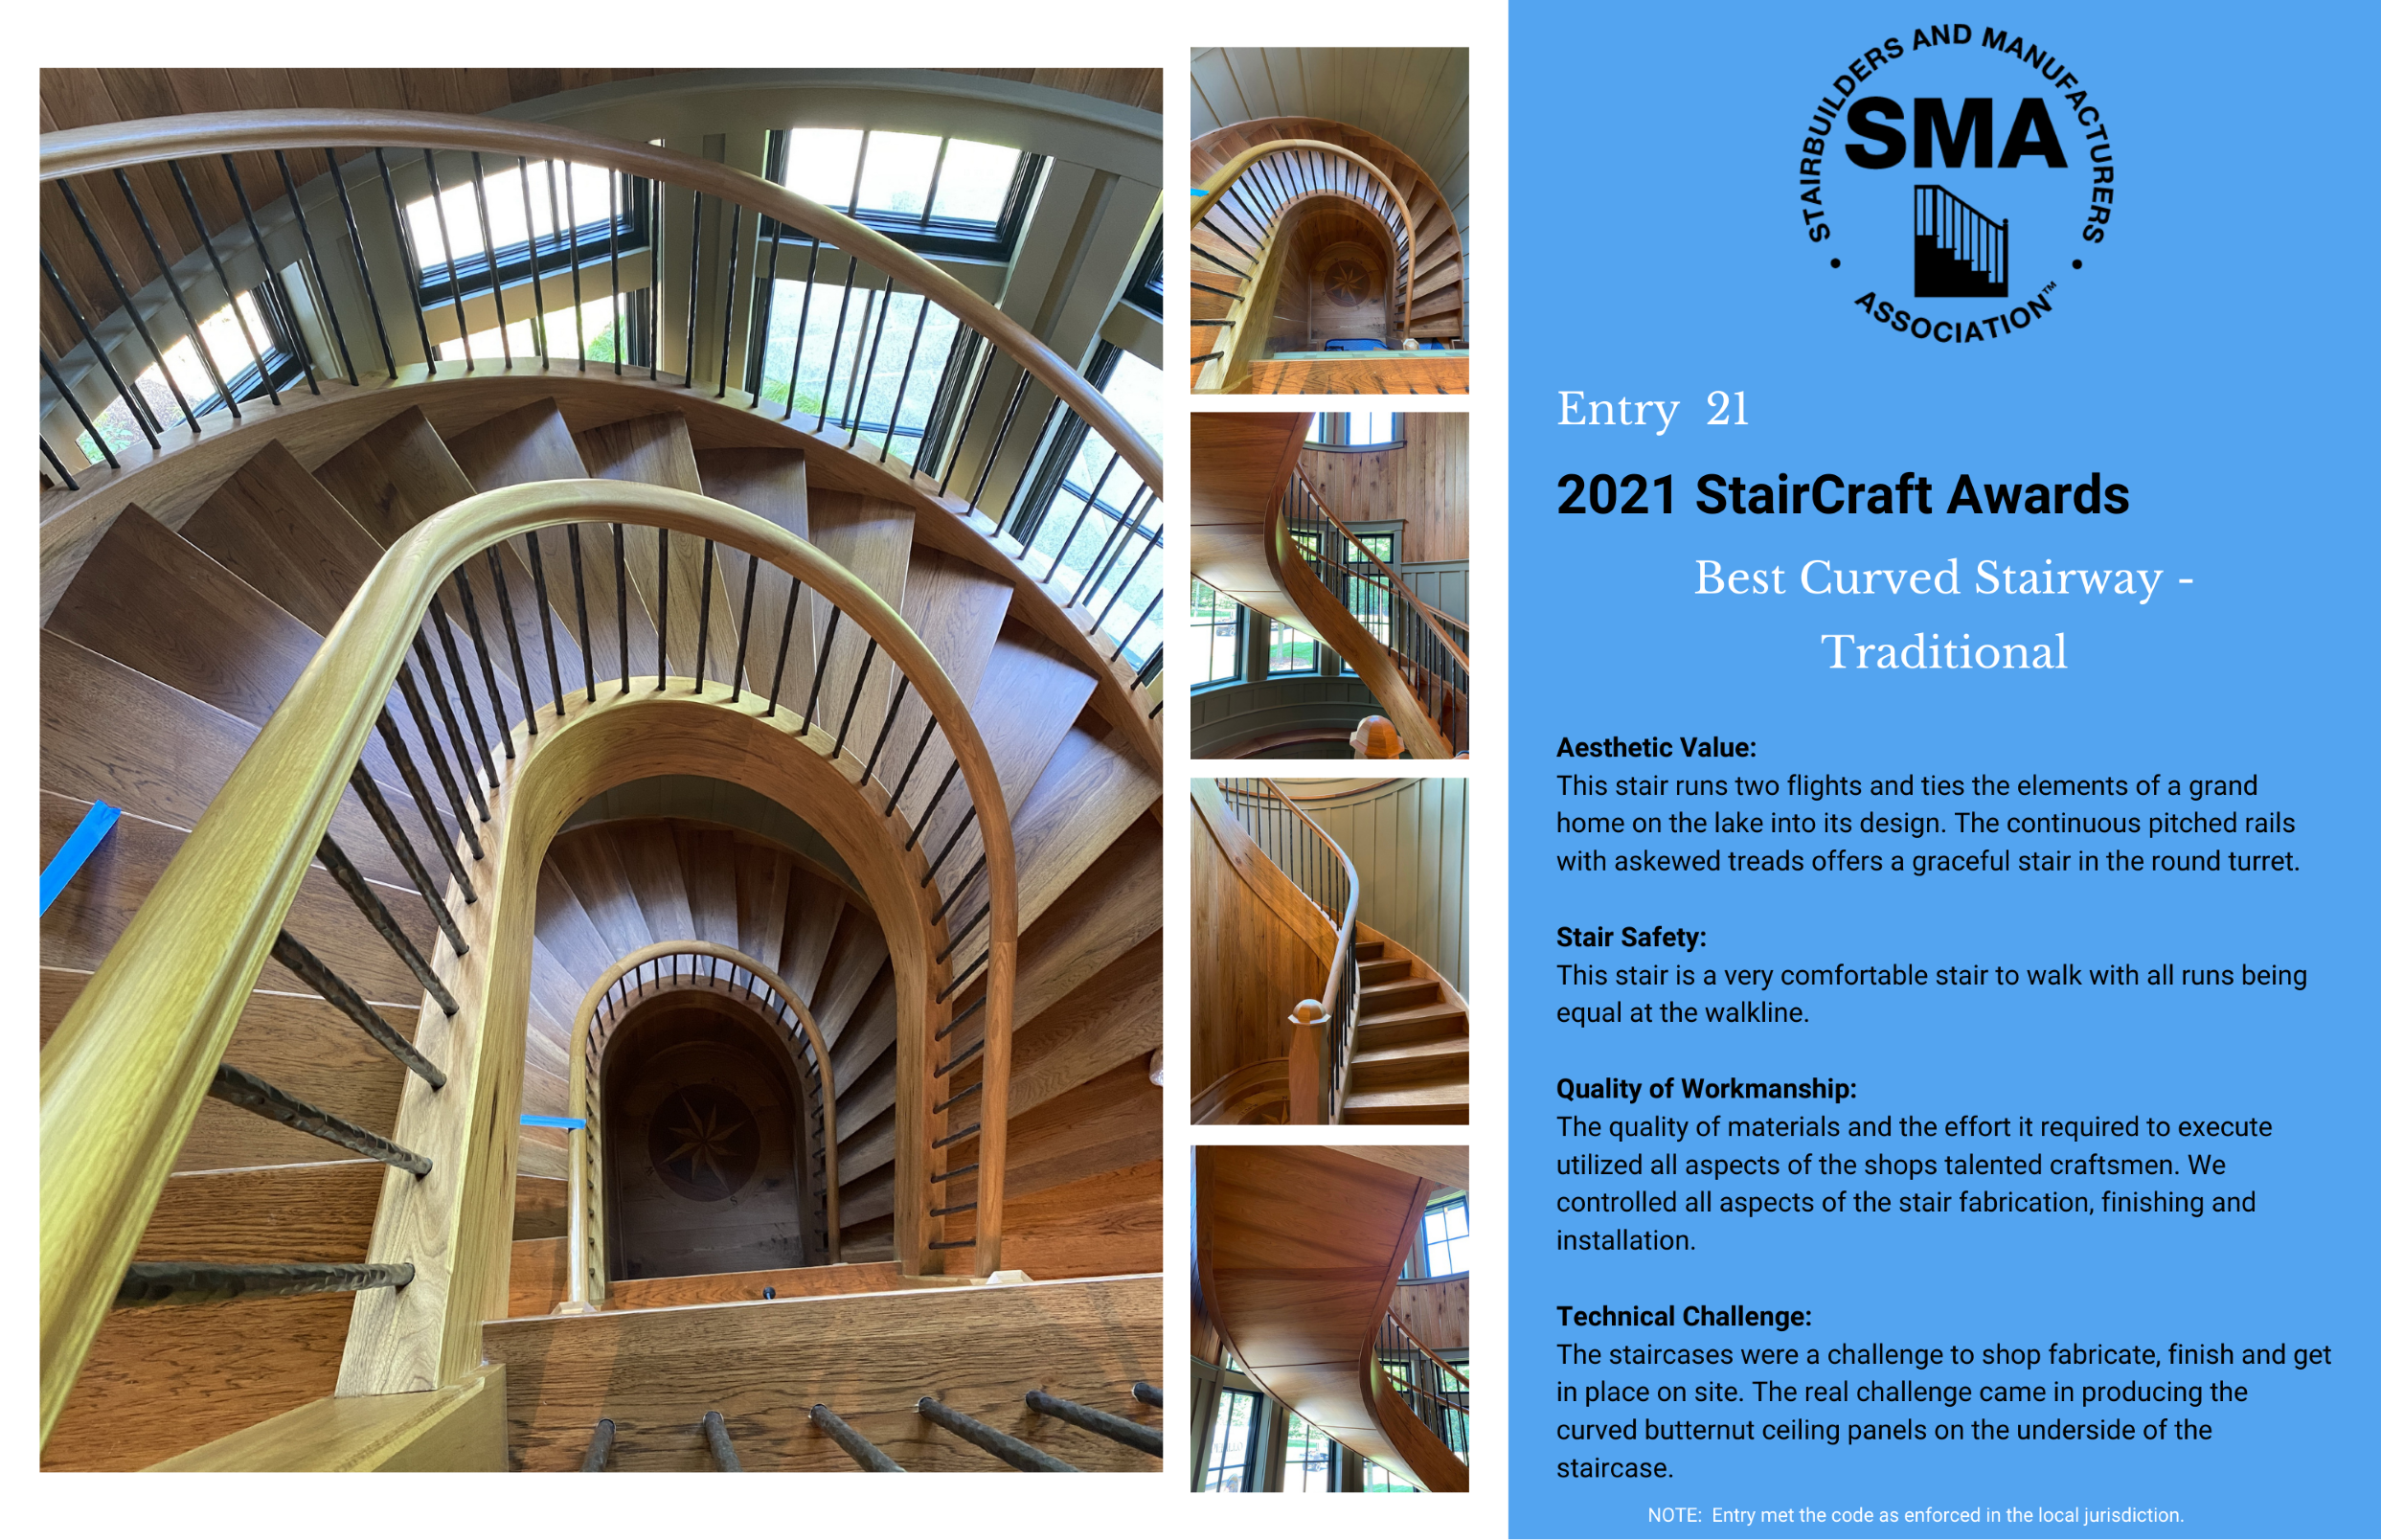 2021 StairCraft Awards Entry 21